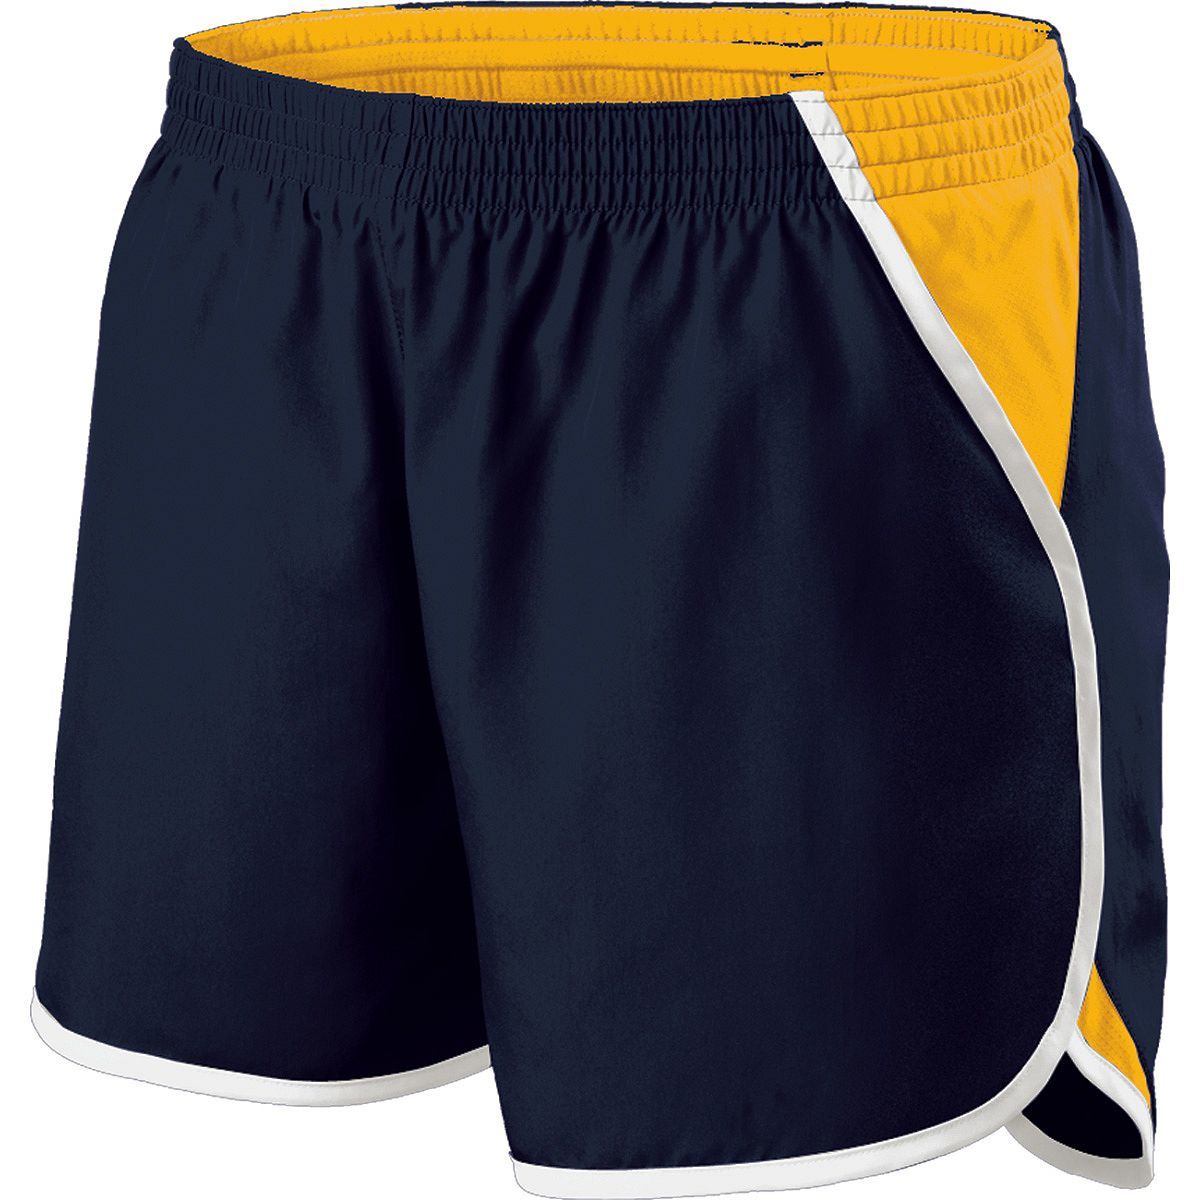 Holloway Girls Energize Shorts in Navy/Light Gold/White  -Part of the Girls, Holloway, Girls-Shorts product lines at KanaleyCreations.com